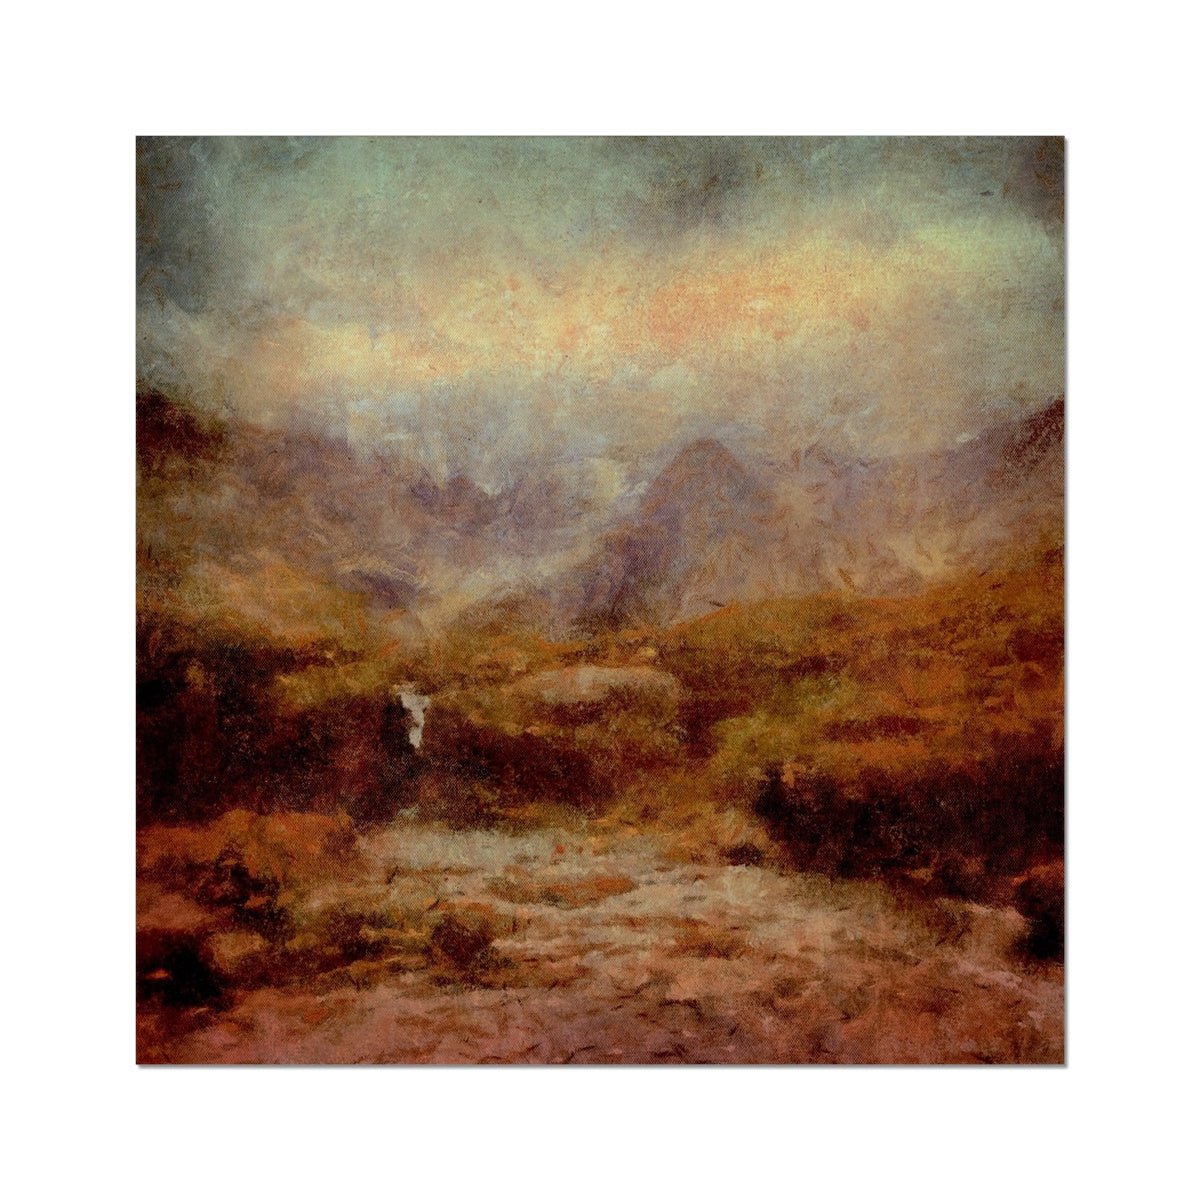 The Brooding Fairy Pools Skye Painting | Fine Art Prints From Scotland-Unframed Prints-Skye Art Gallery-24"x24"-Paintings, Prints, Homeware, Art Gifts From Scotland By Scottish Artist Kevin Hunter